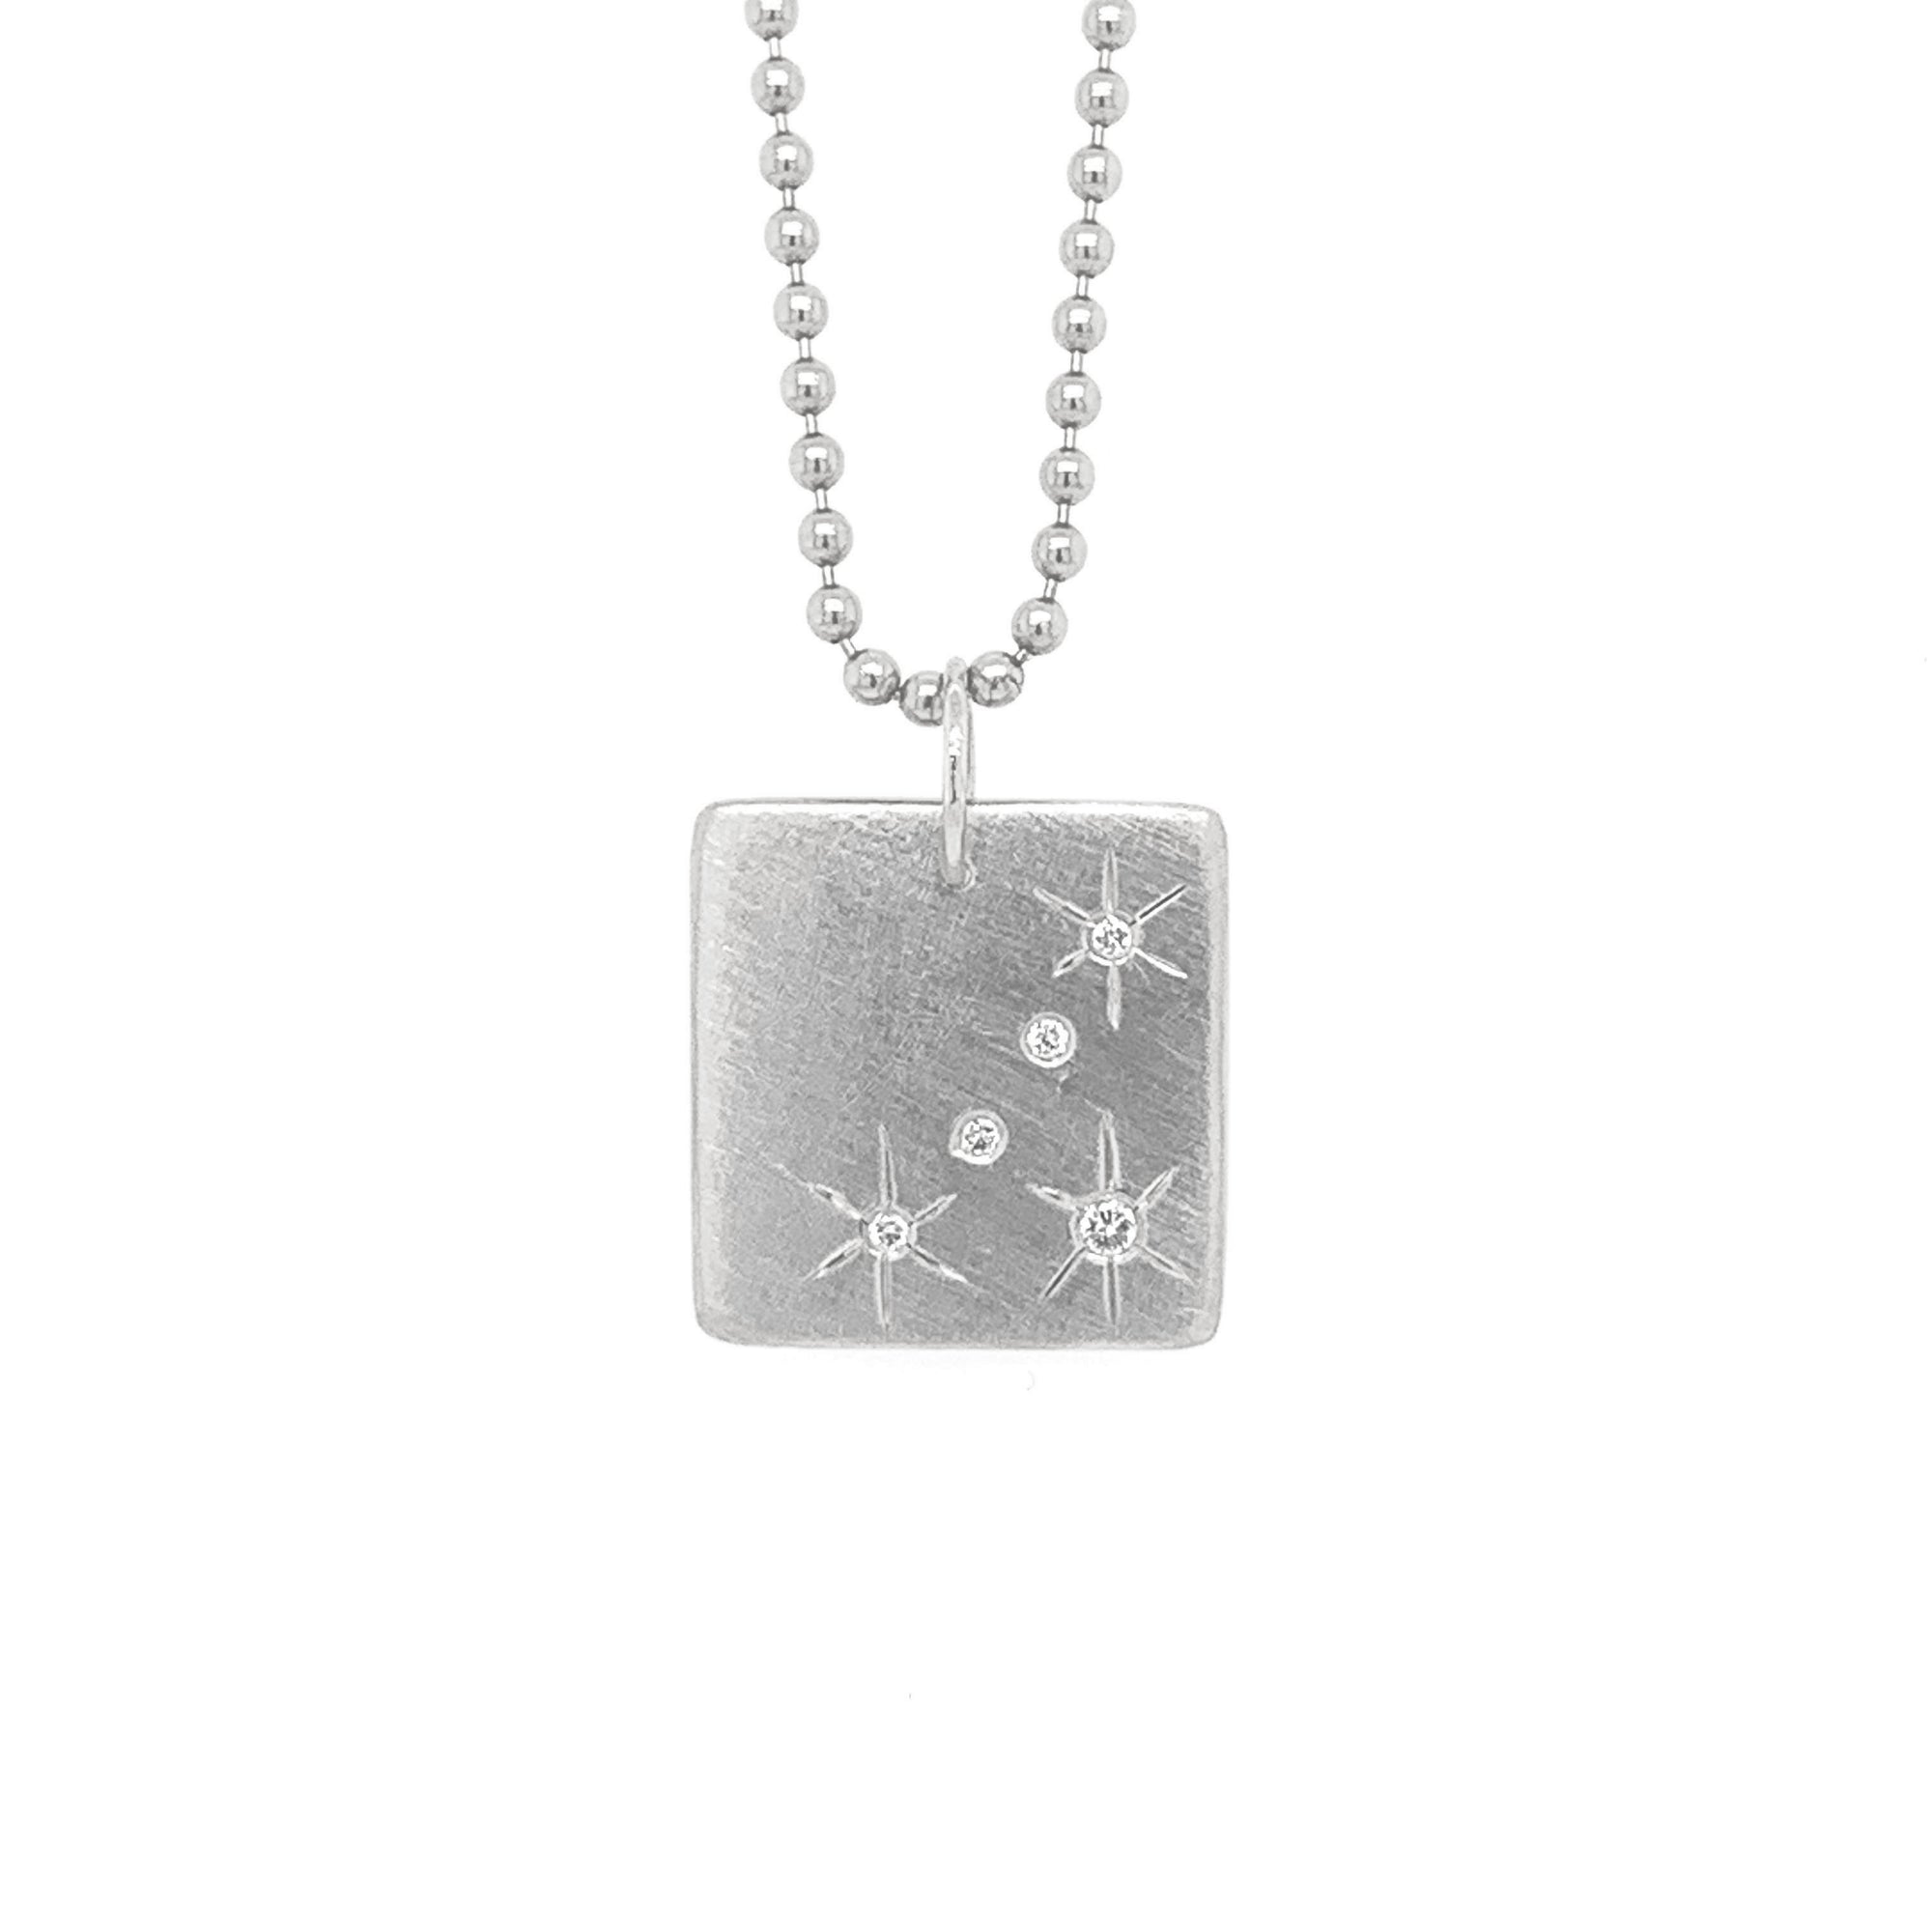 14k white gold small MORU square charm with diamonds and starburst etching